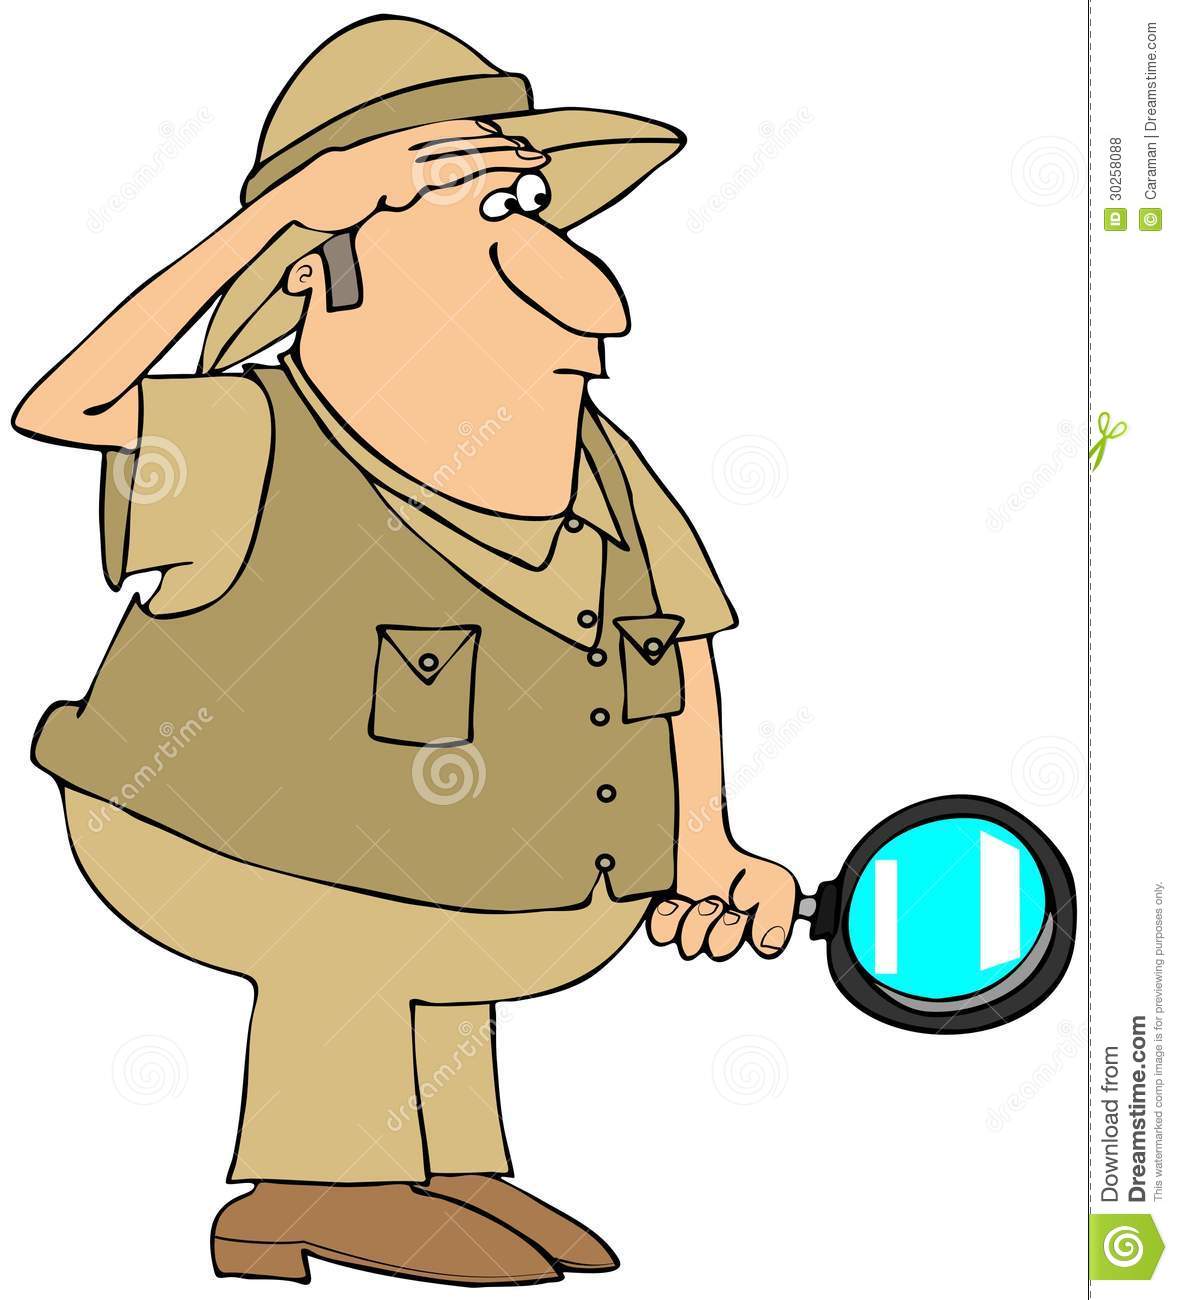 This Illustration Depicts A Man In A Safari Hat And Vest Holding A